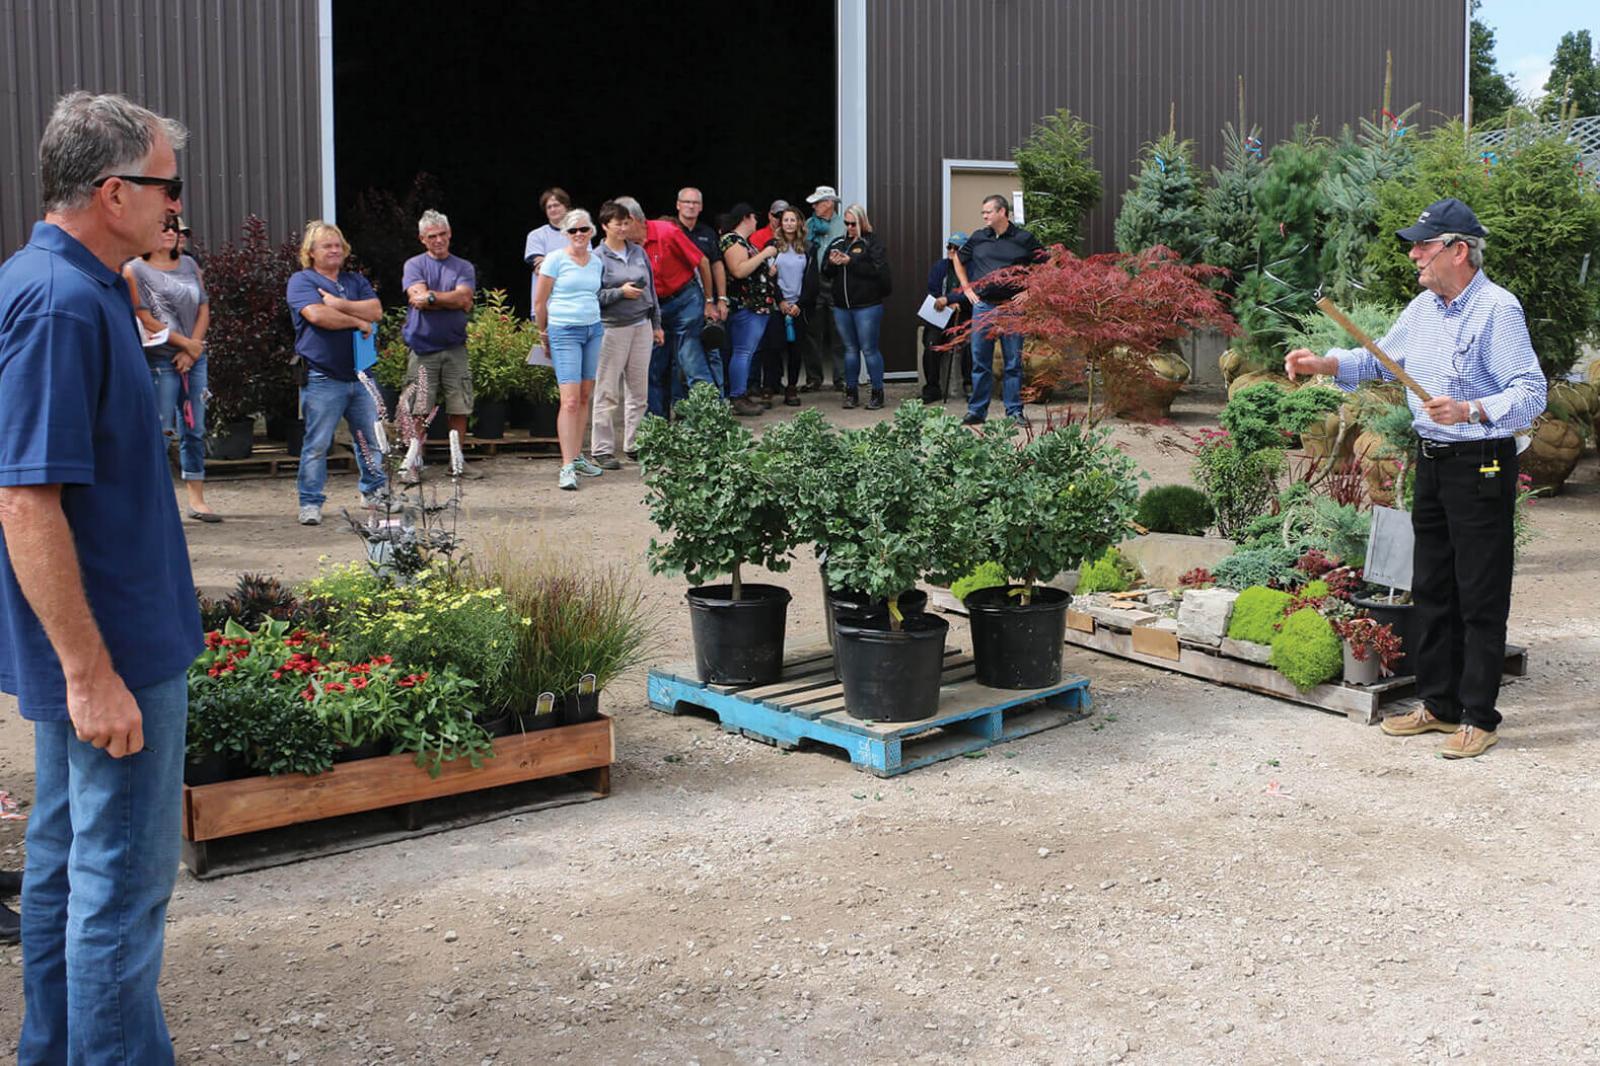 Over 250 skids of plant material were auctioned off at the 2018 growers Industry Auction.